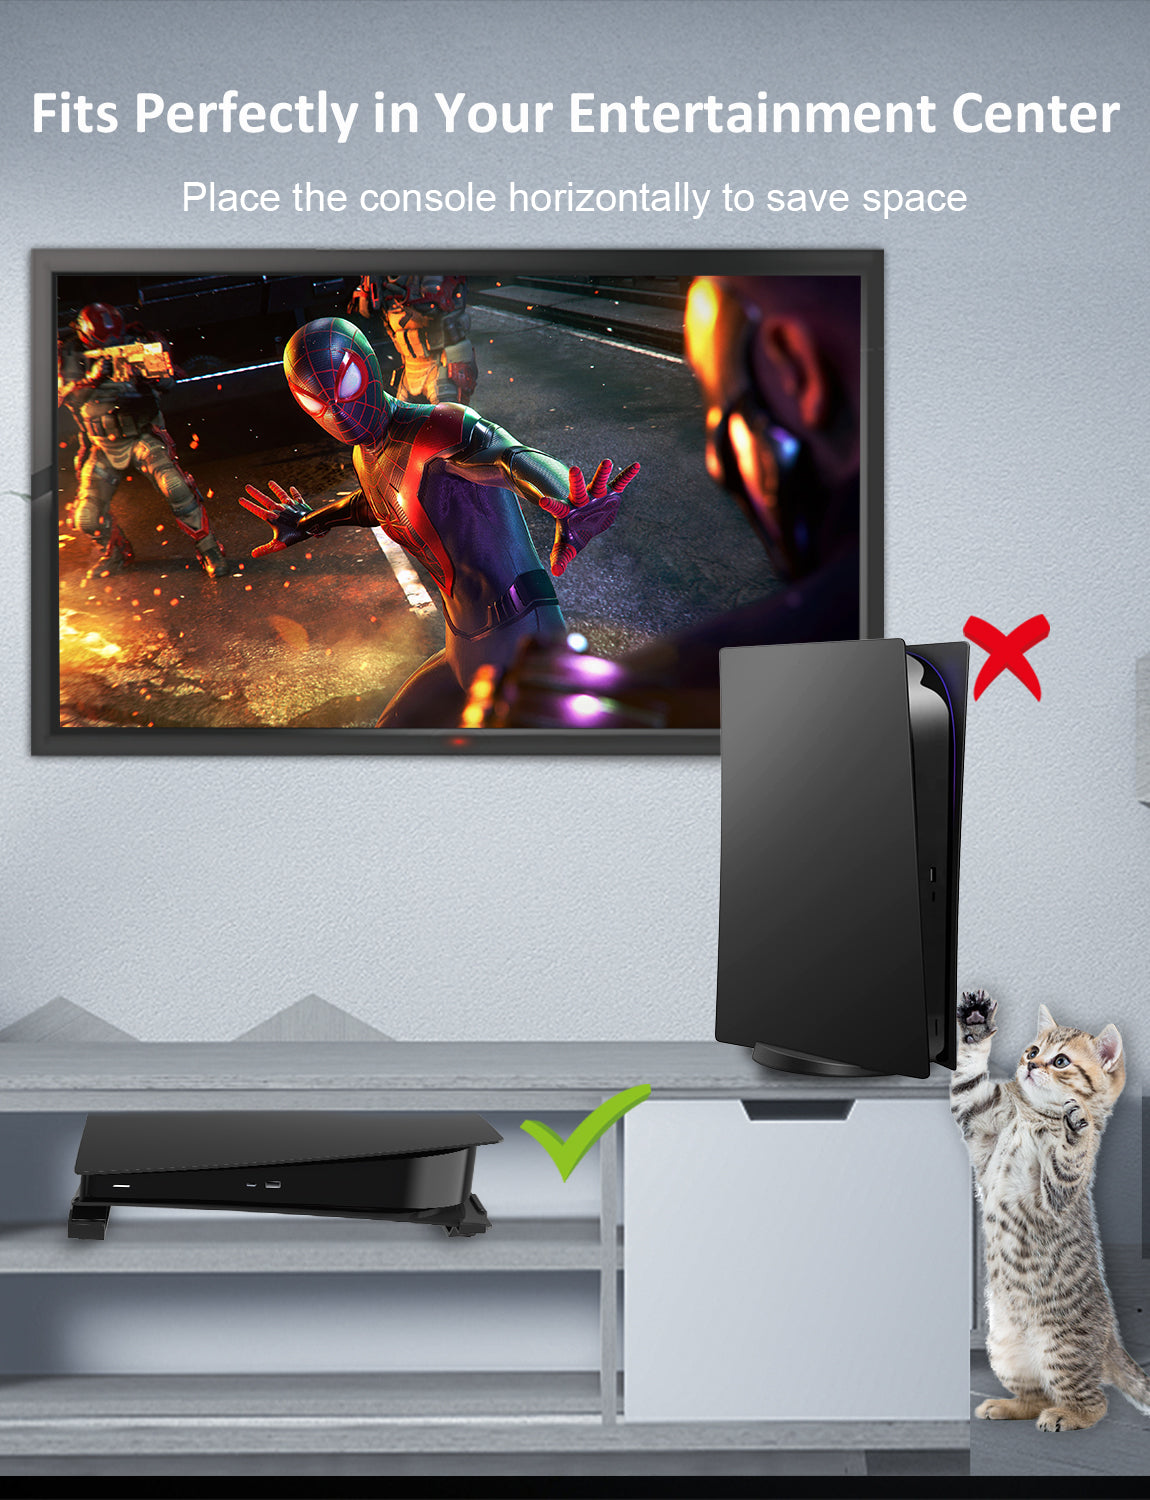 The included vertical stand in the kit saves space and protects PS5 from collisions.